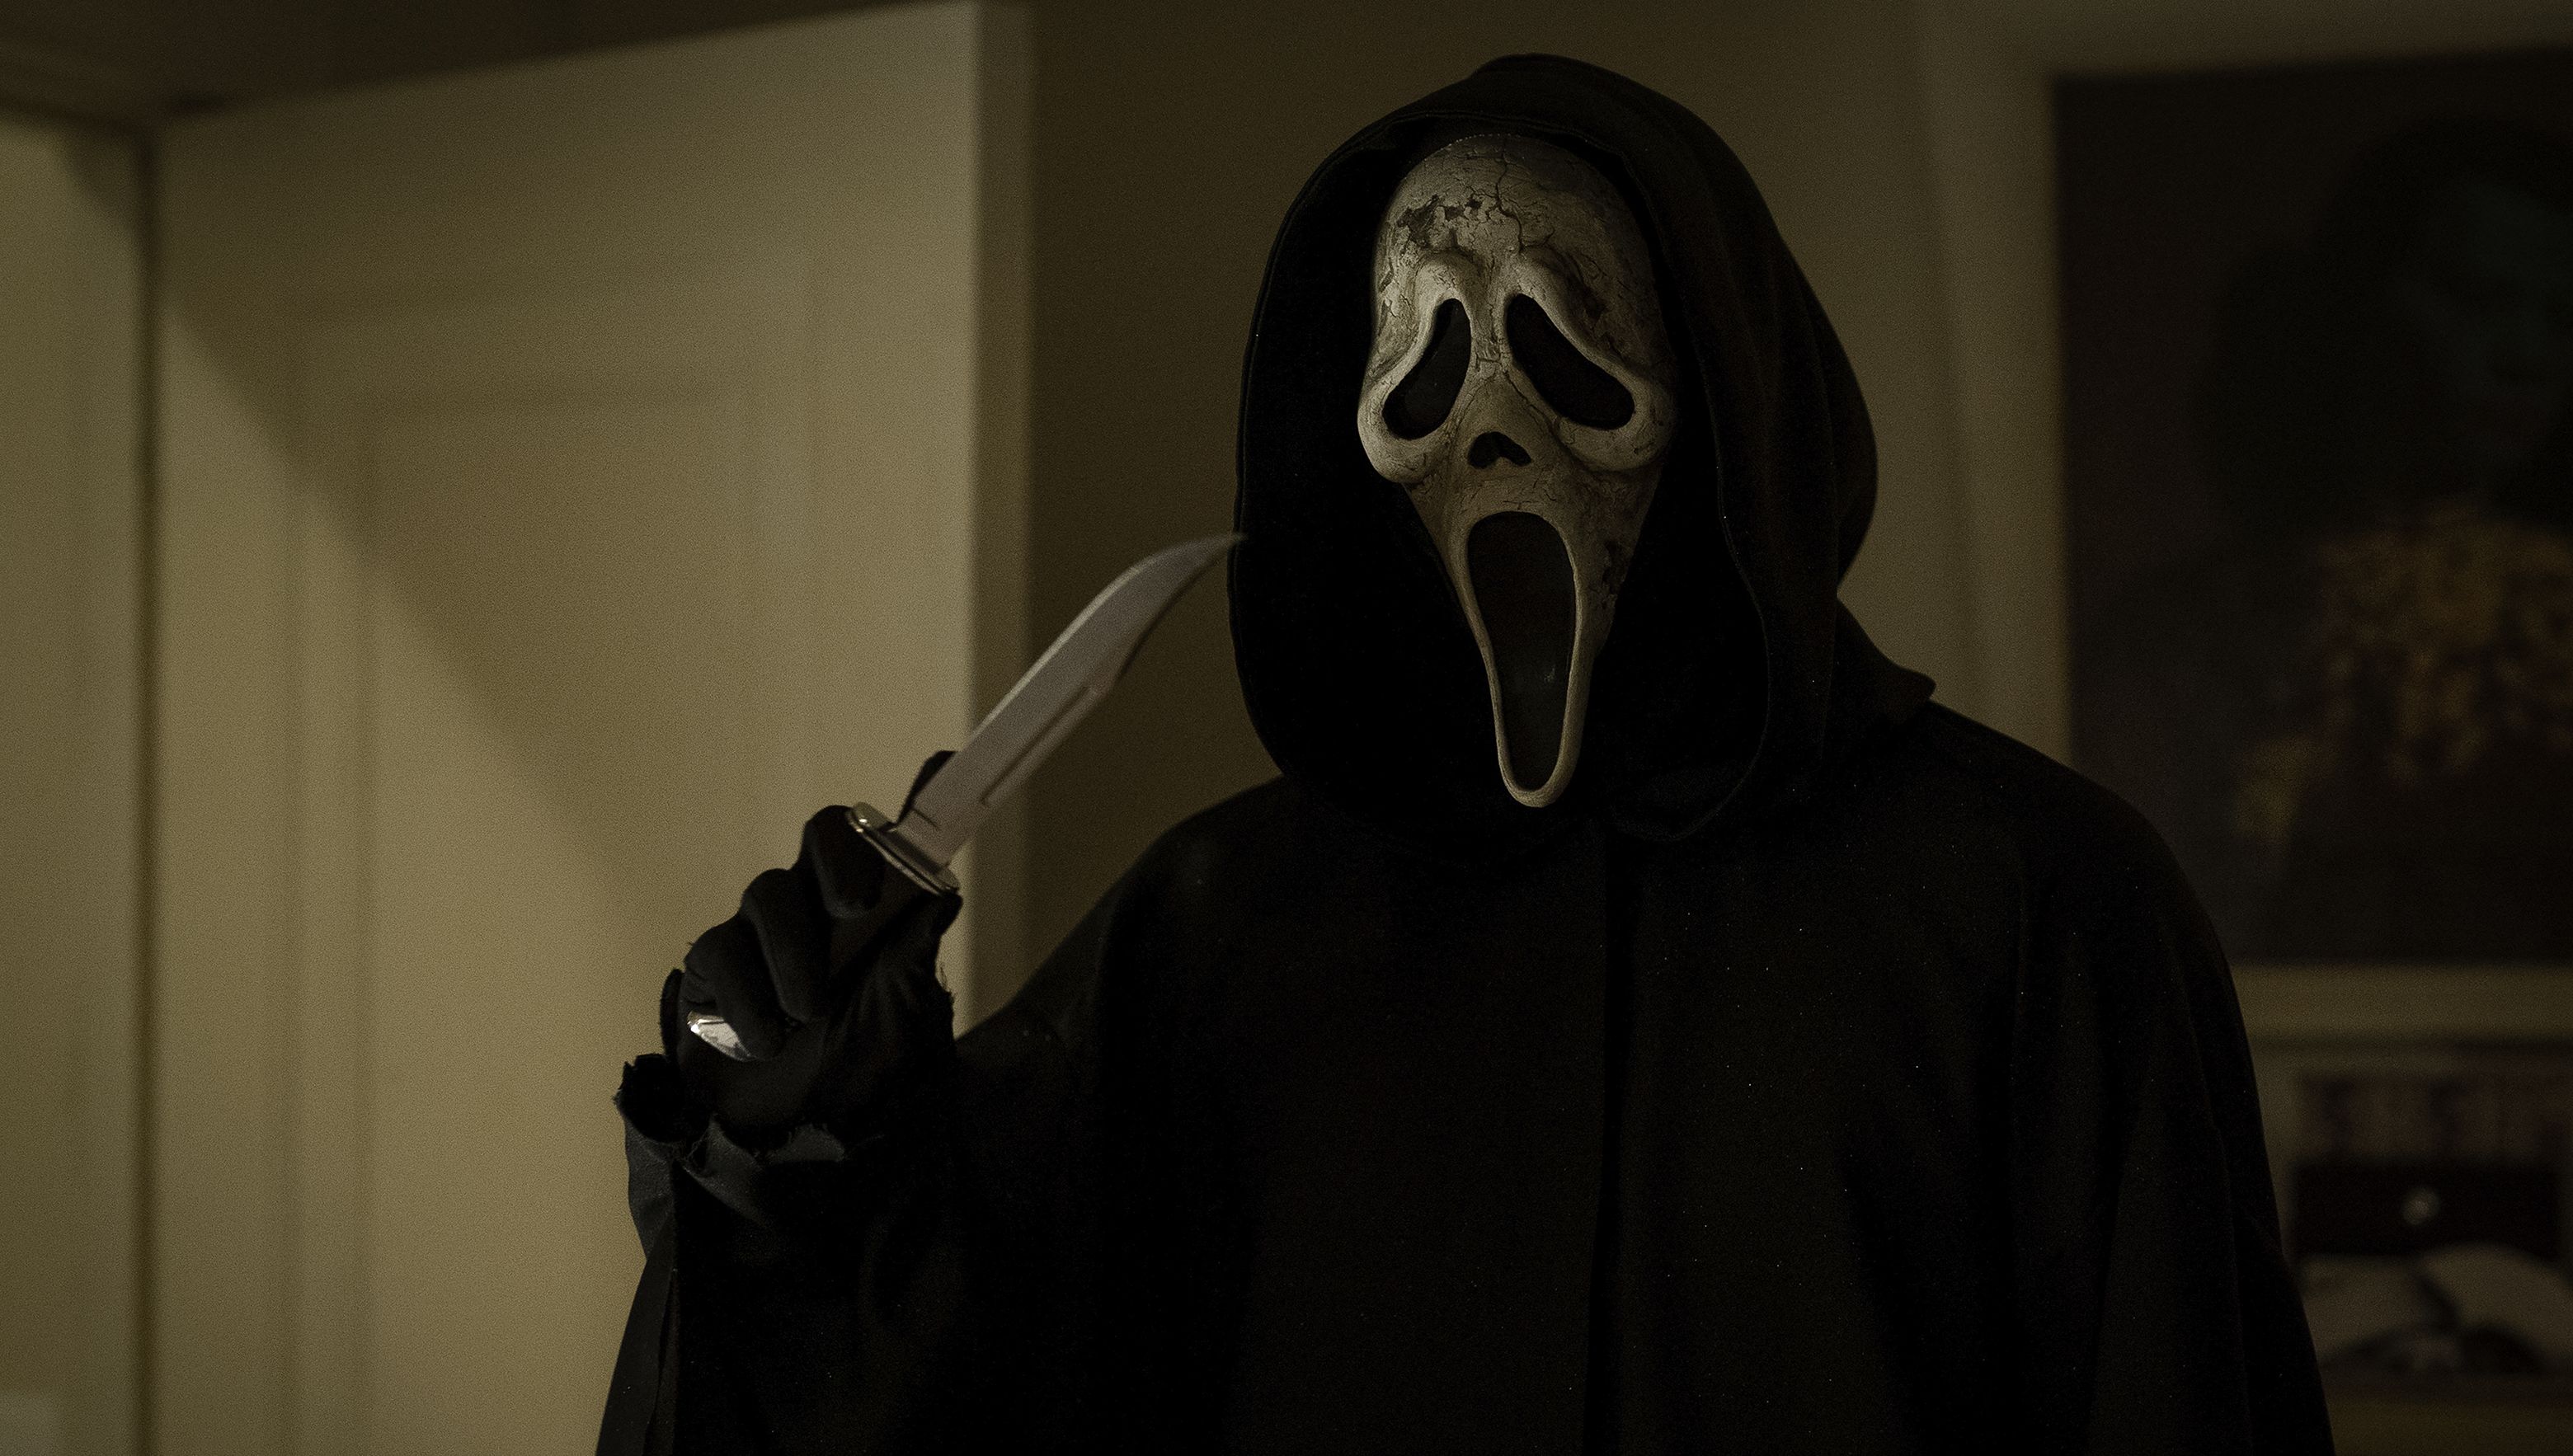 Does Scream 6 have a post-credit scene?